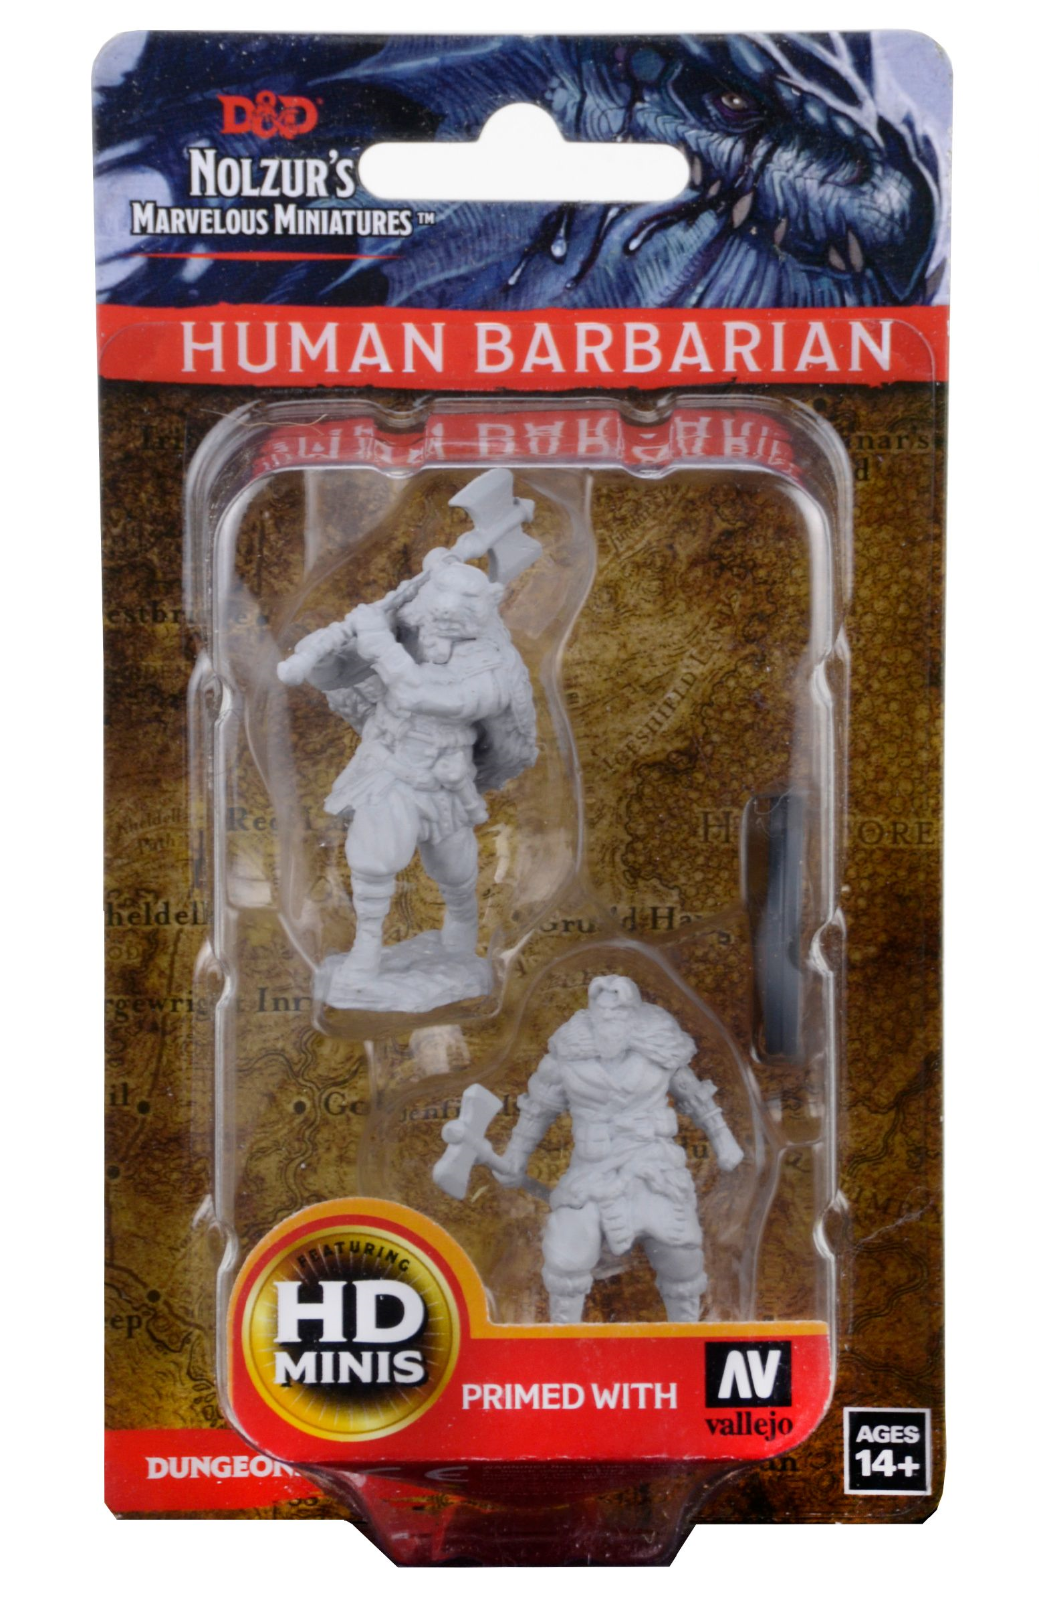 Human Male Barbarian: D&D Nolzur's Marvelous Unpainted Miniatures (W1) - Loaded Dice Barry Vale of Glamorgan CF64 3HD